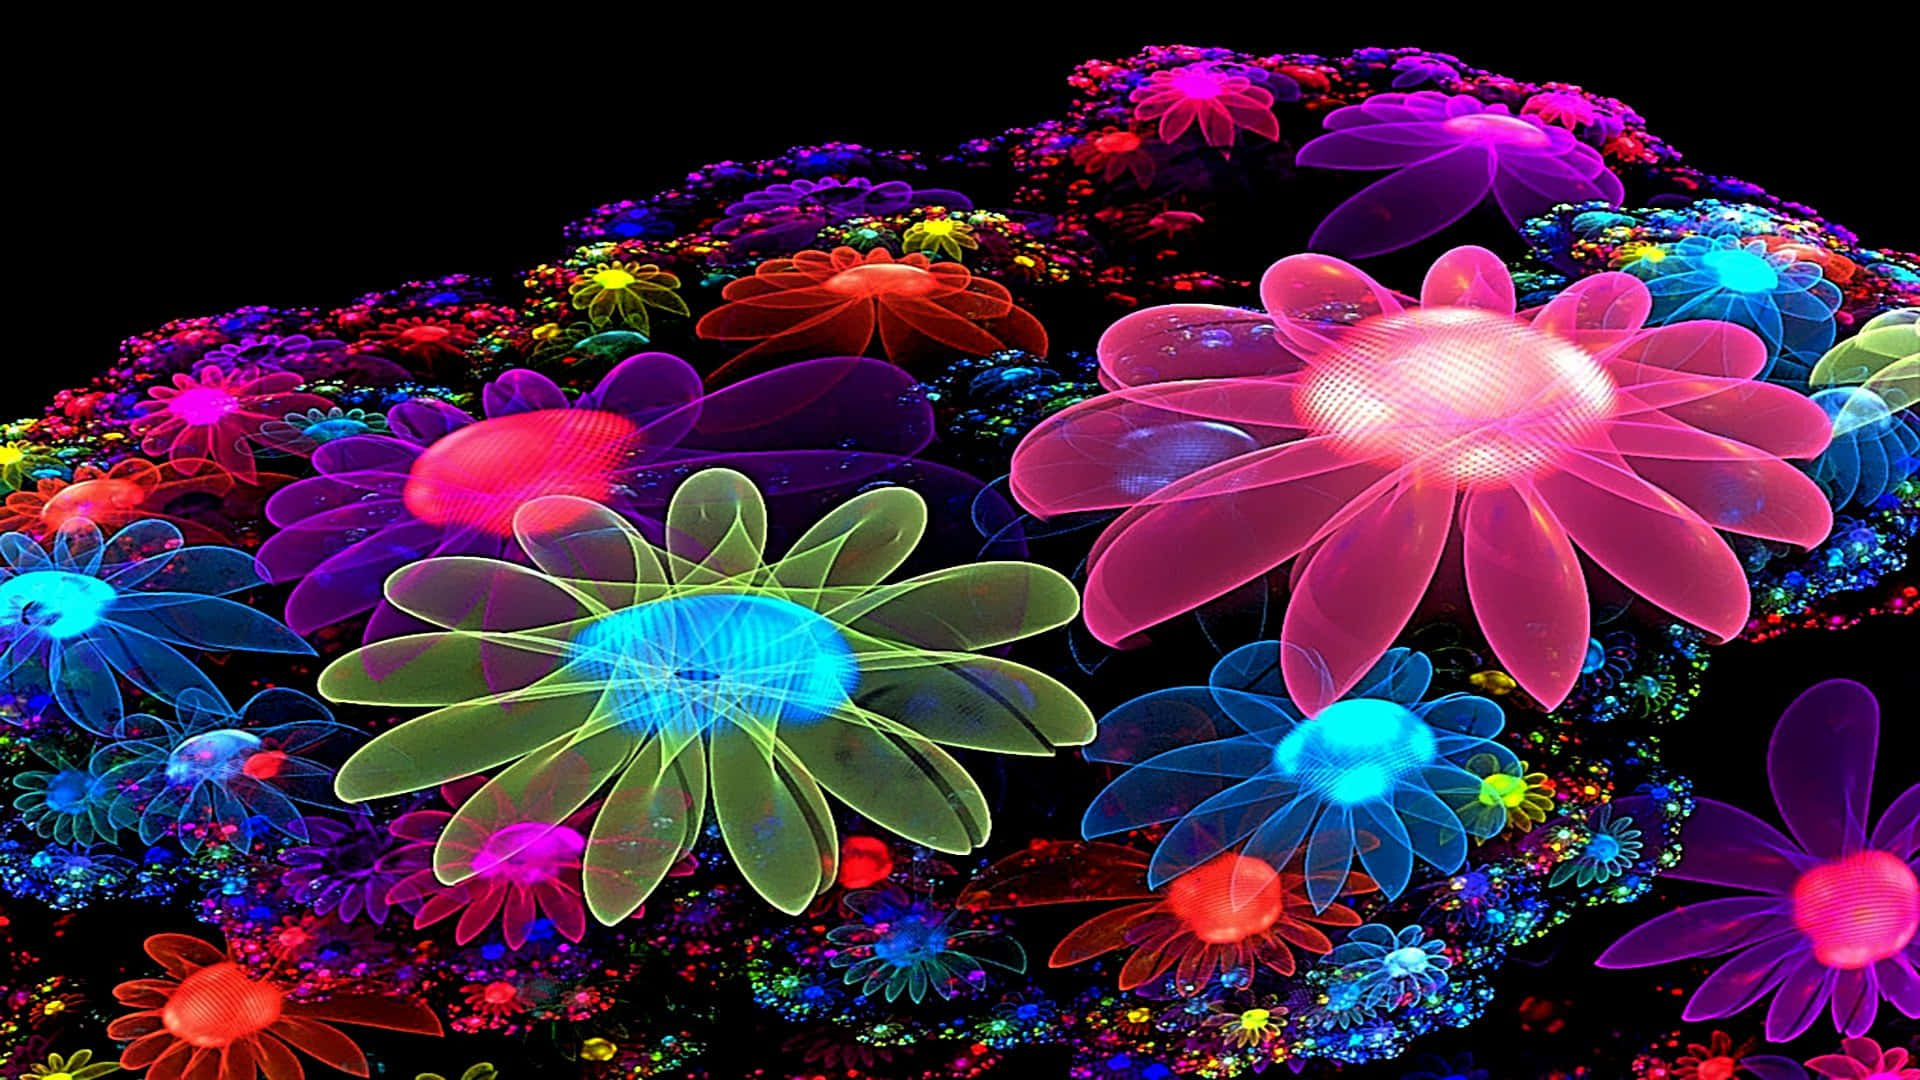 A Beautiful Vibrant Display Of Neon Flowers In Bloom Background